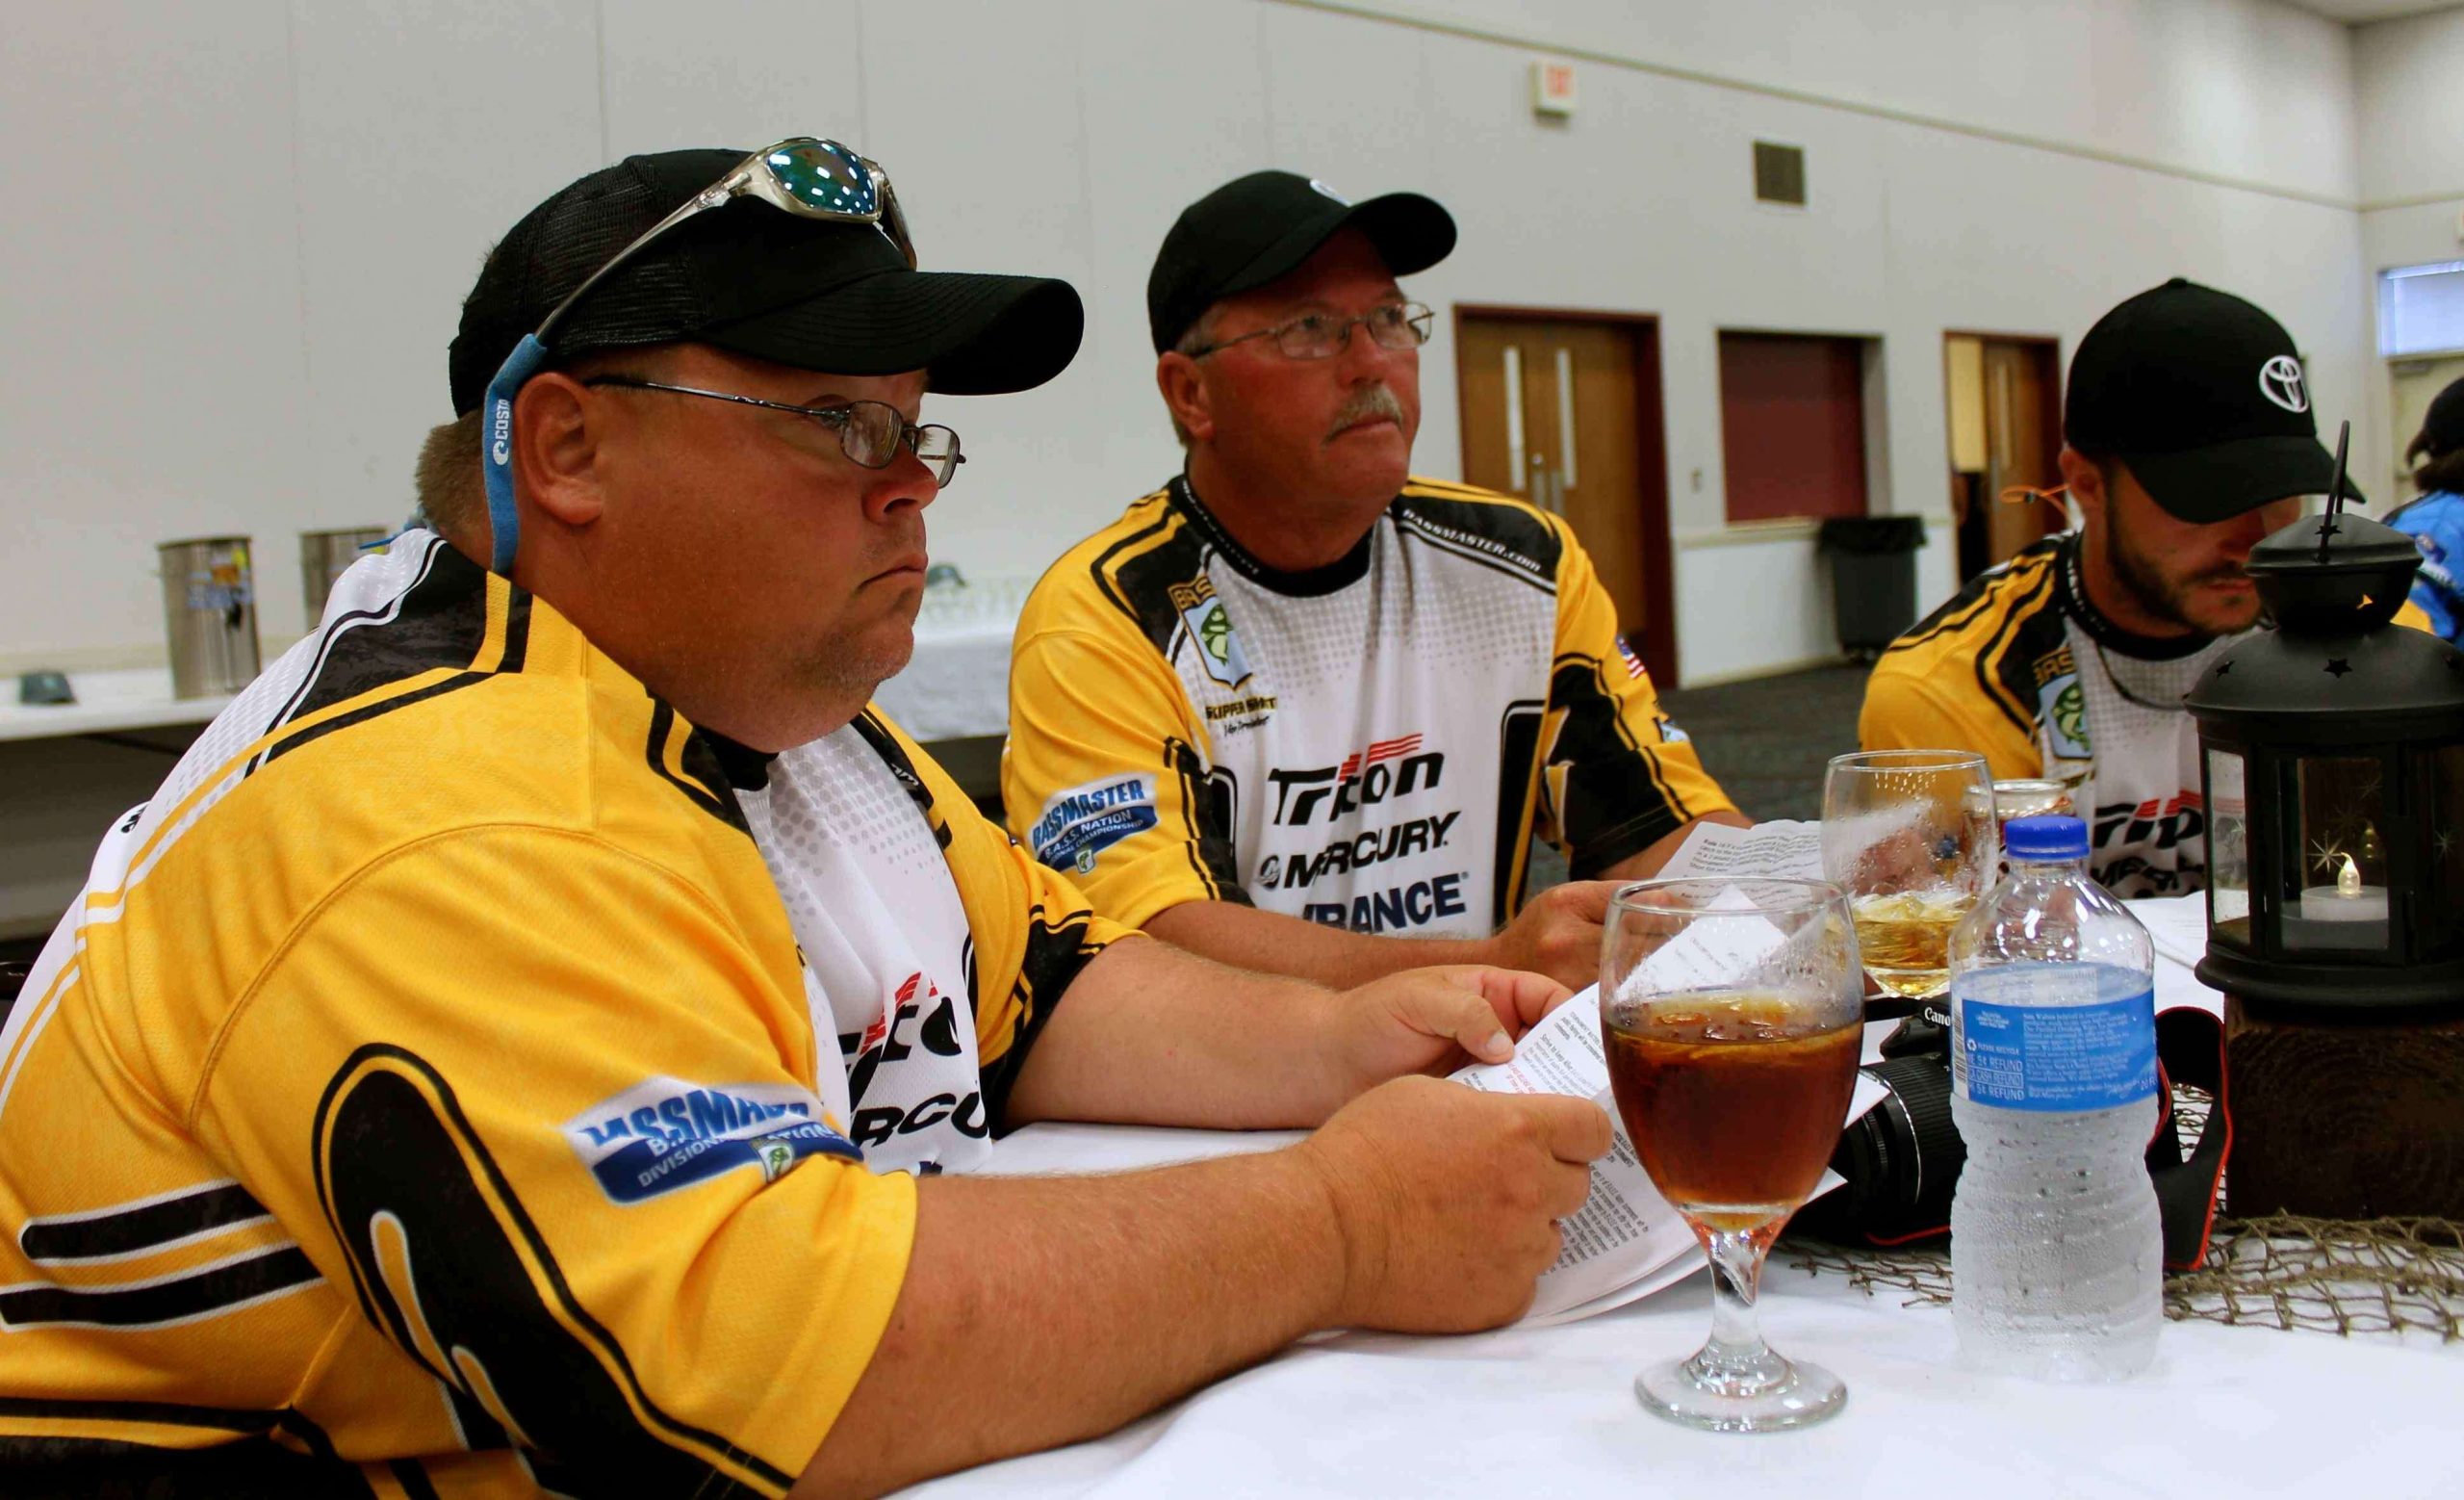 Mississippi anglers Jimmy Murphy and Skipper Smith listen intently as Stewart covers the tournament rules.
